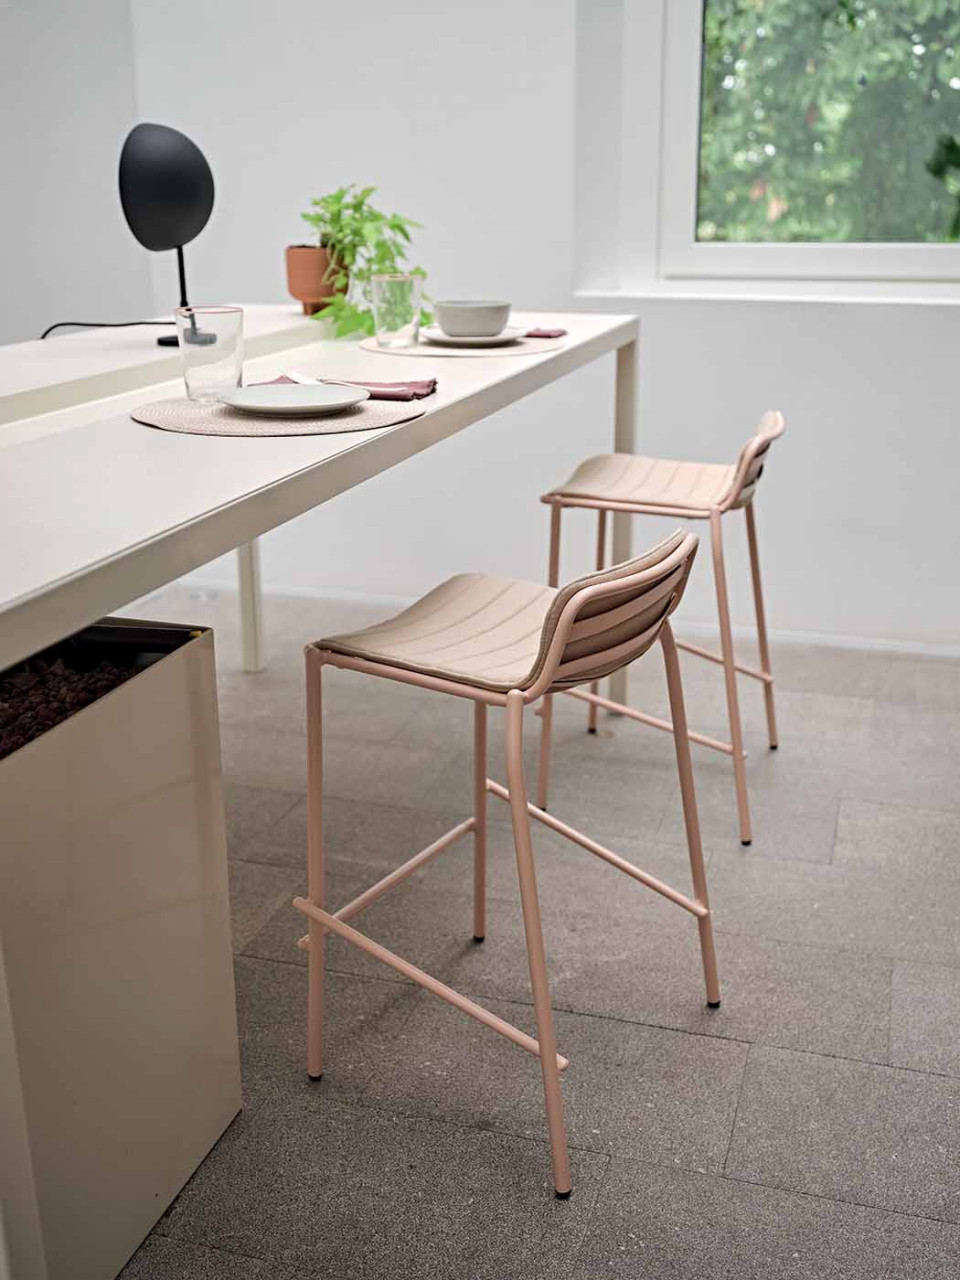 Trampoliere stool suitable for outdoor use in pink